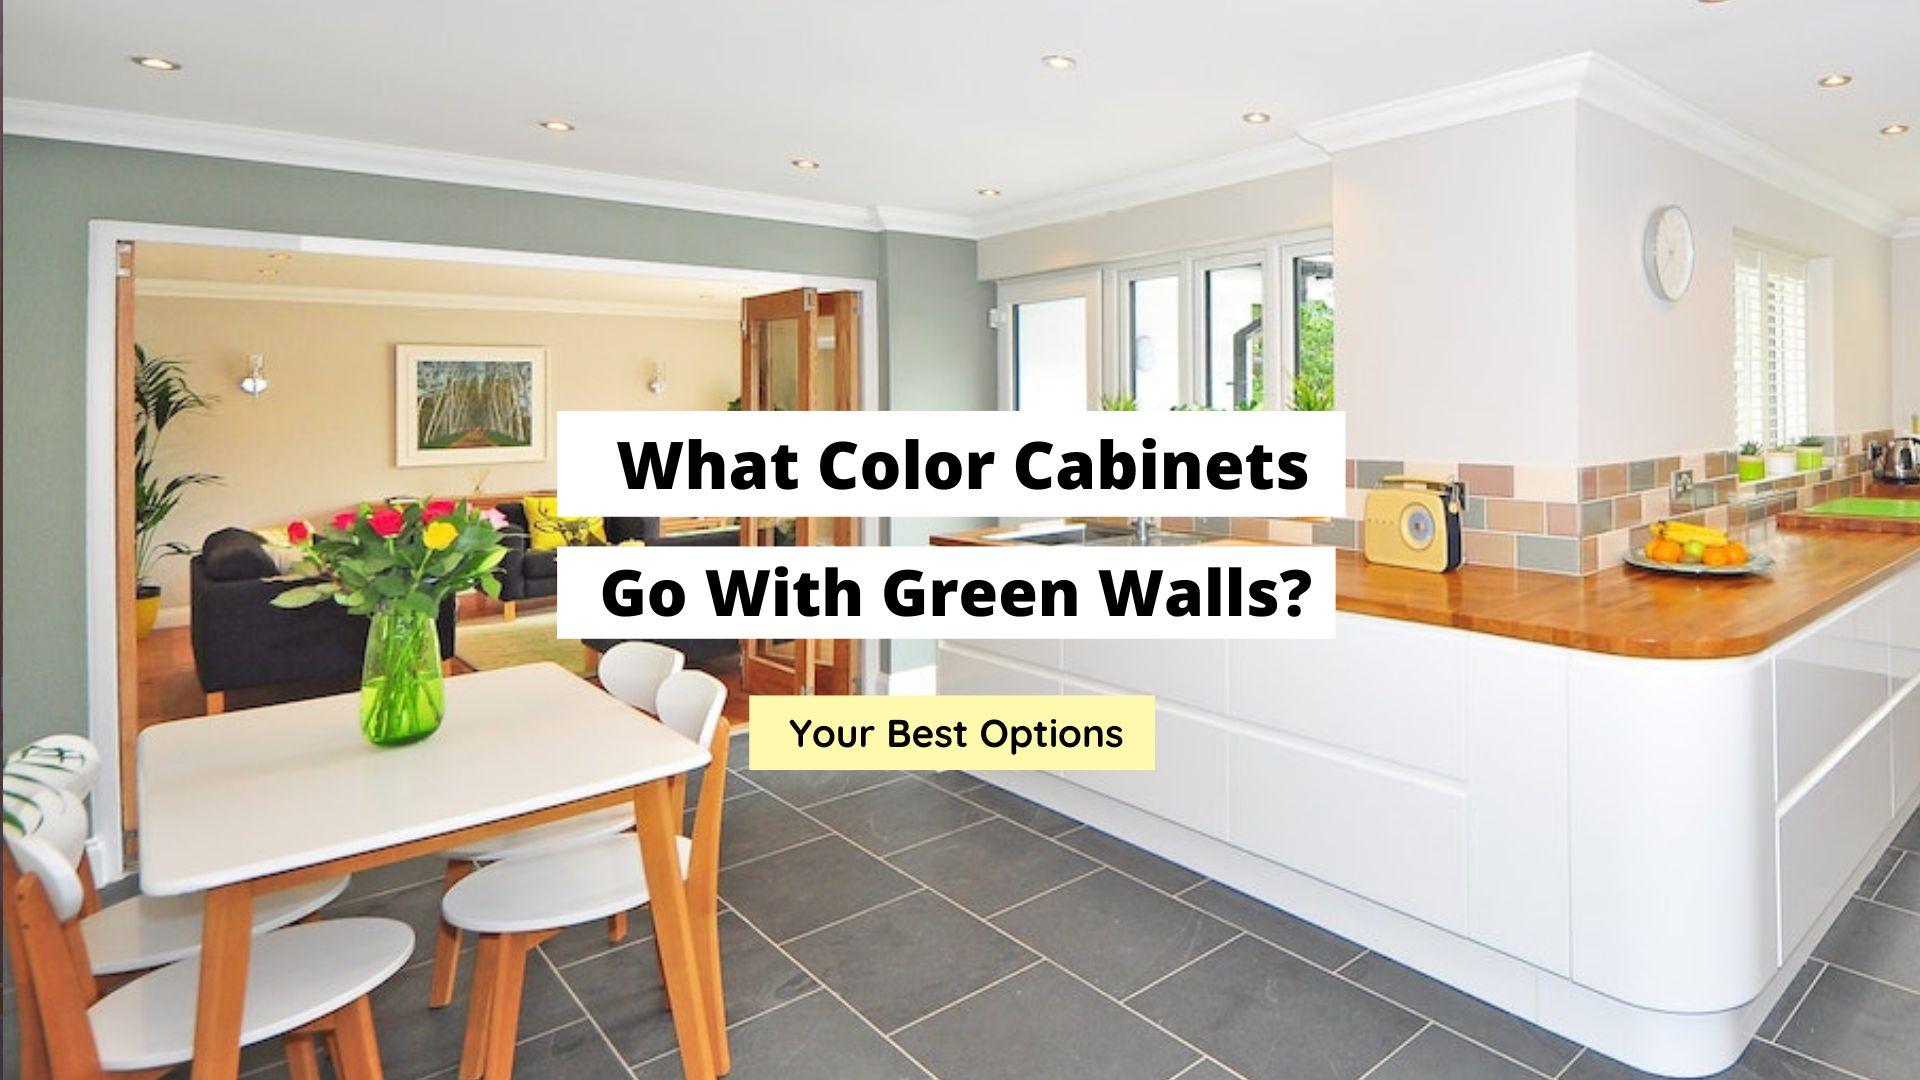 What Color Cabinets Go With Green Walls